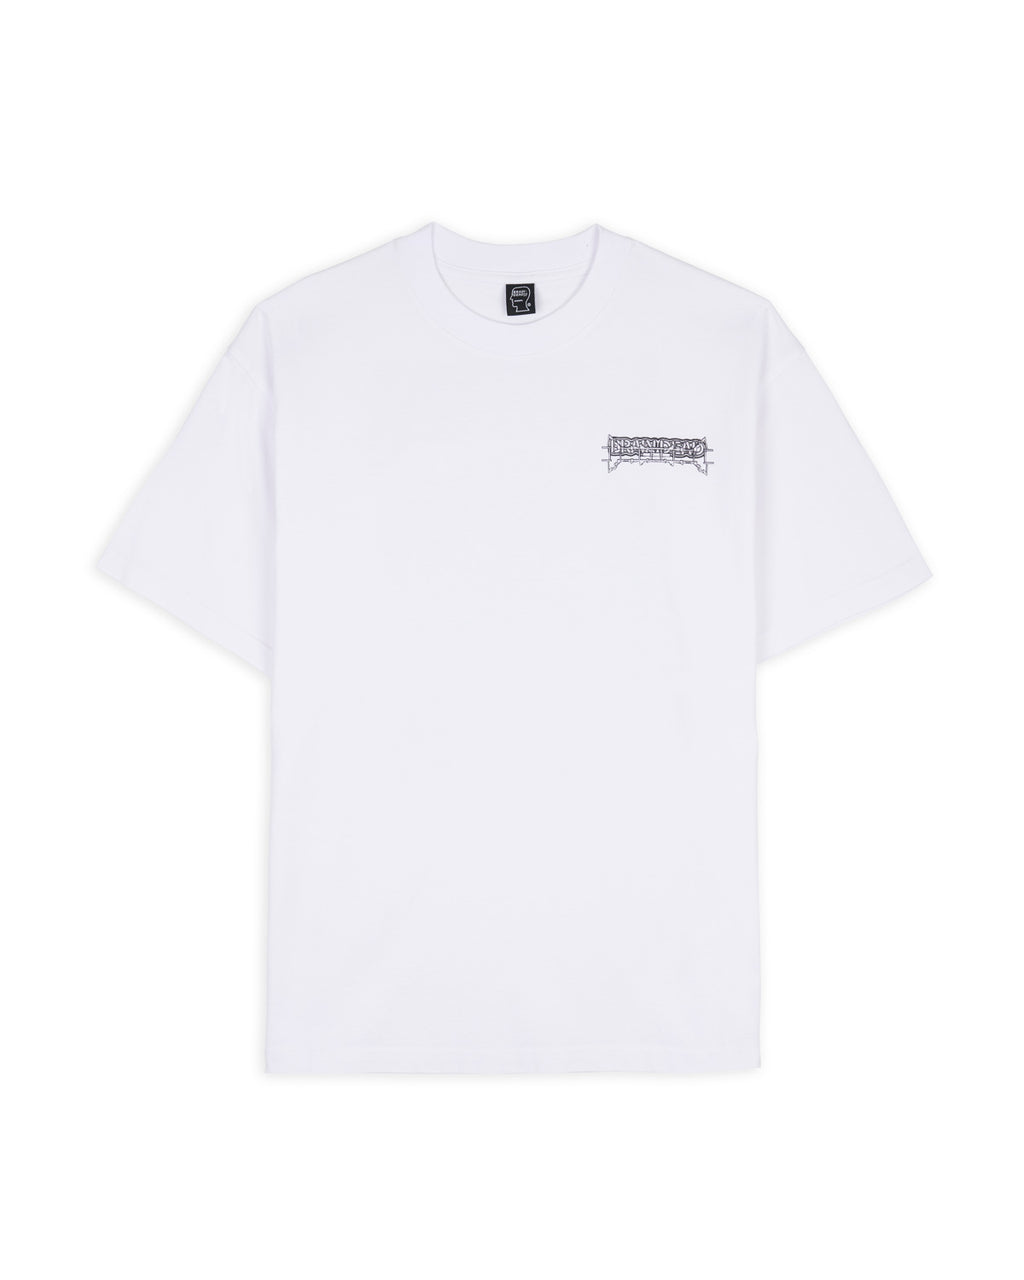 Helicopter T-Shirt - White 1